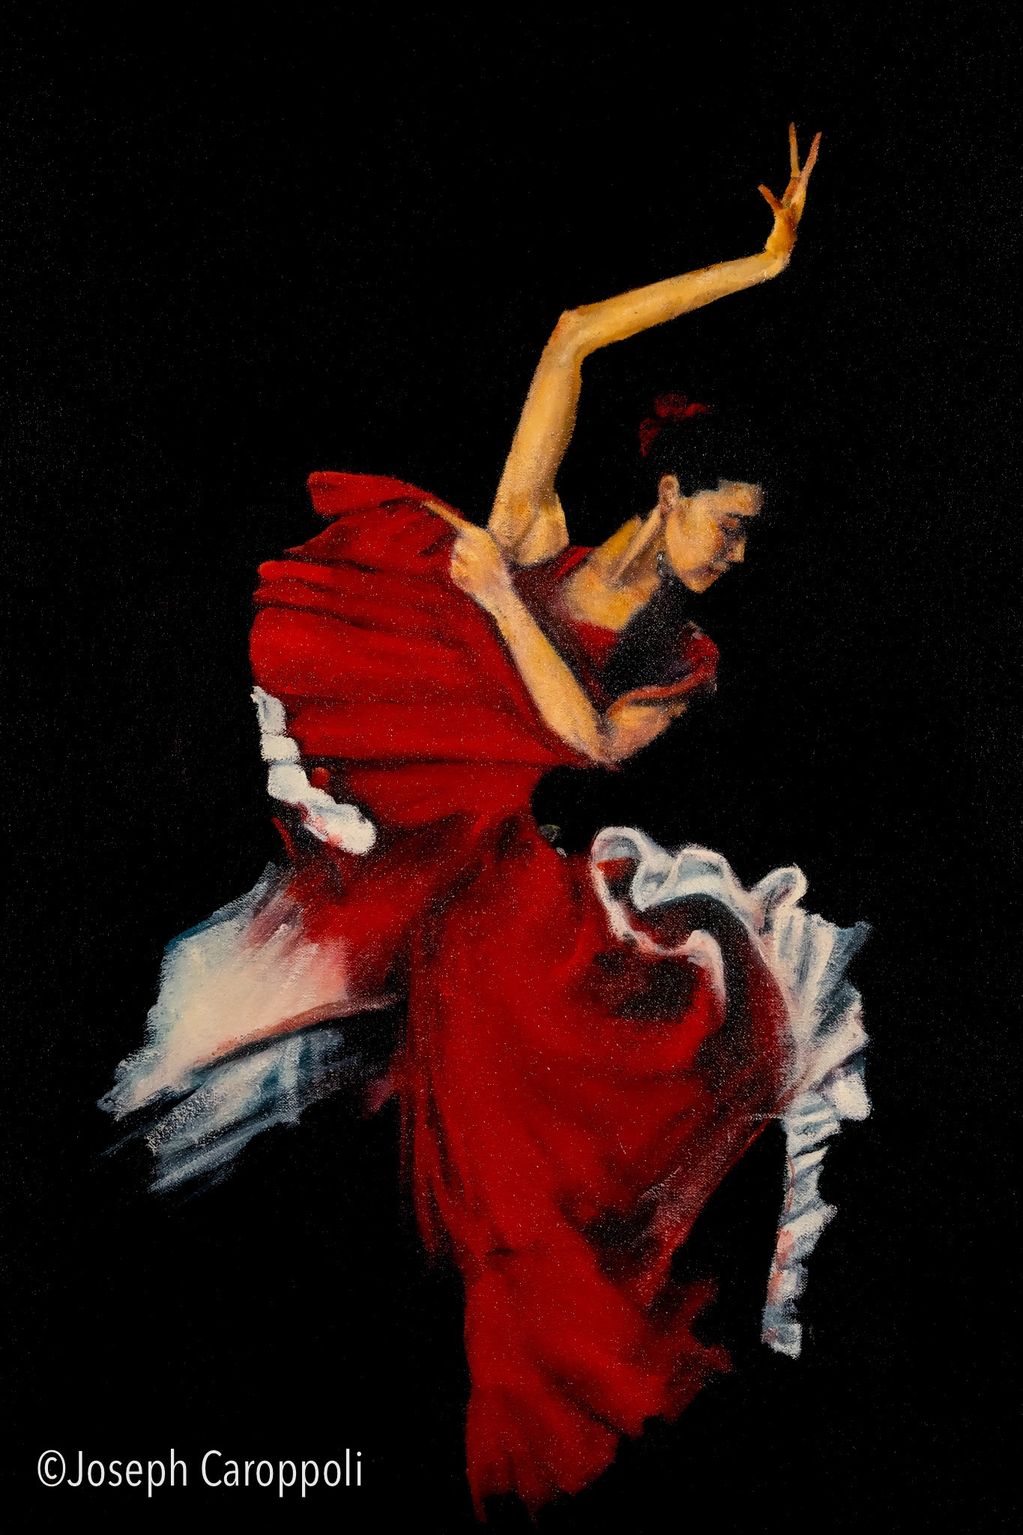 Flamenco in Red
Oil Painting on Canvas
24”x18”

